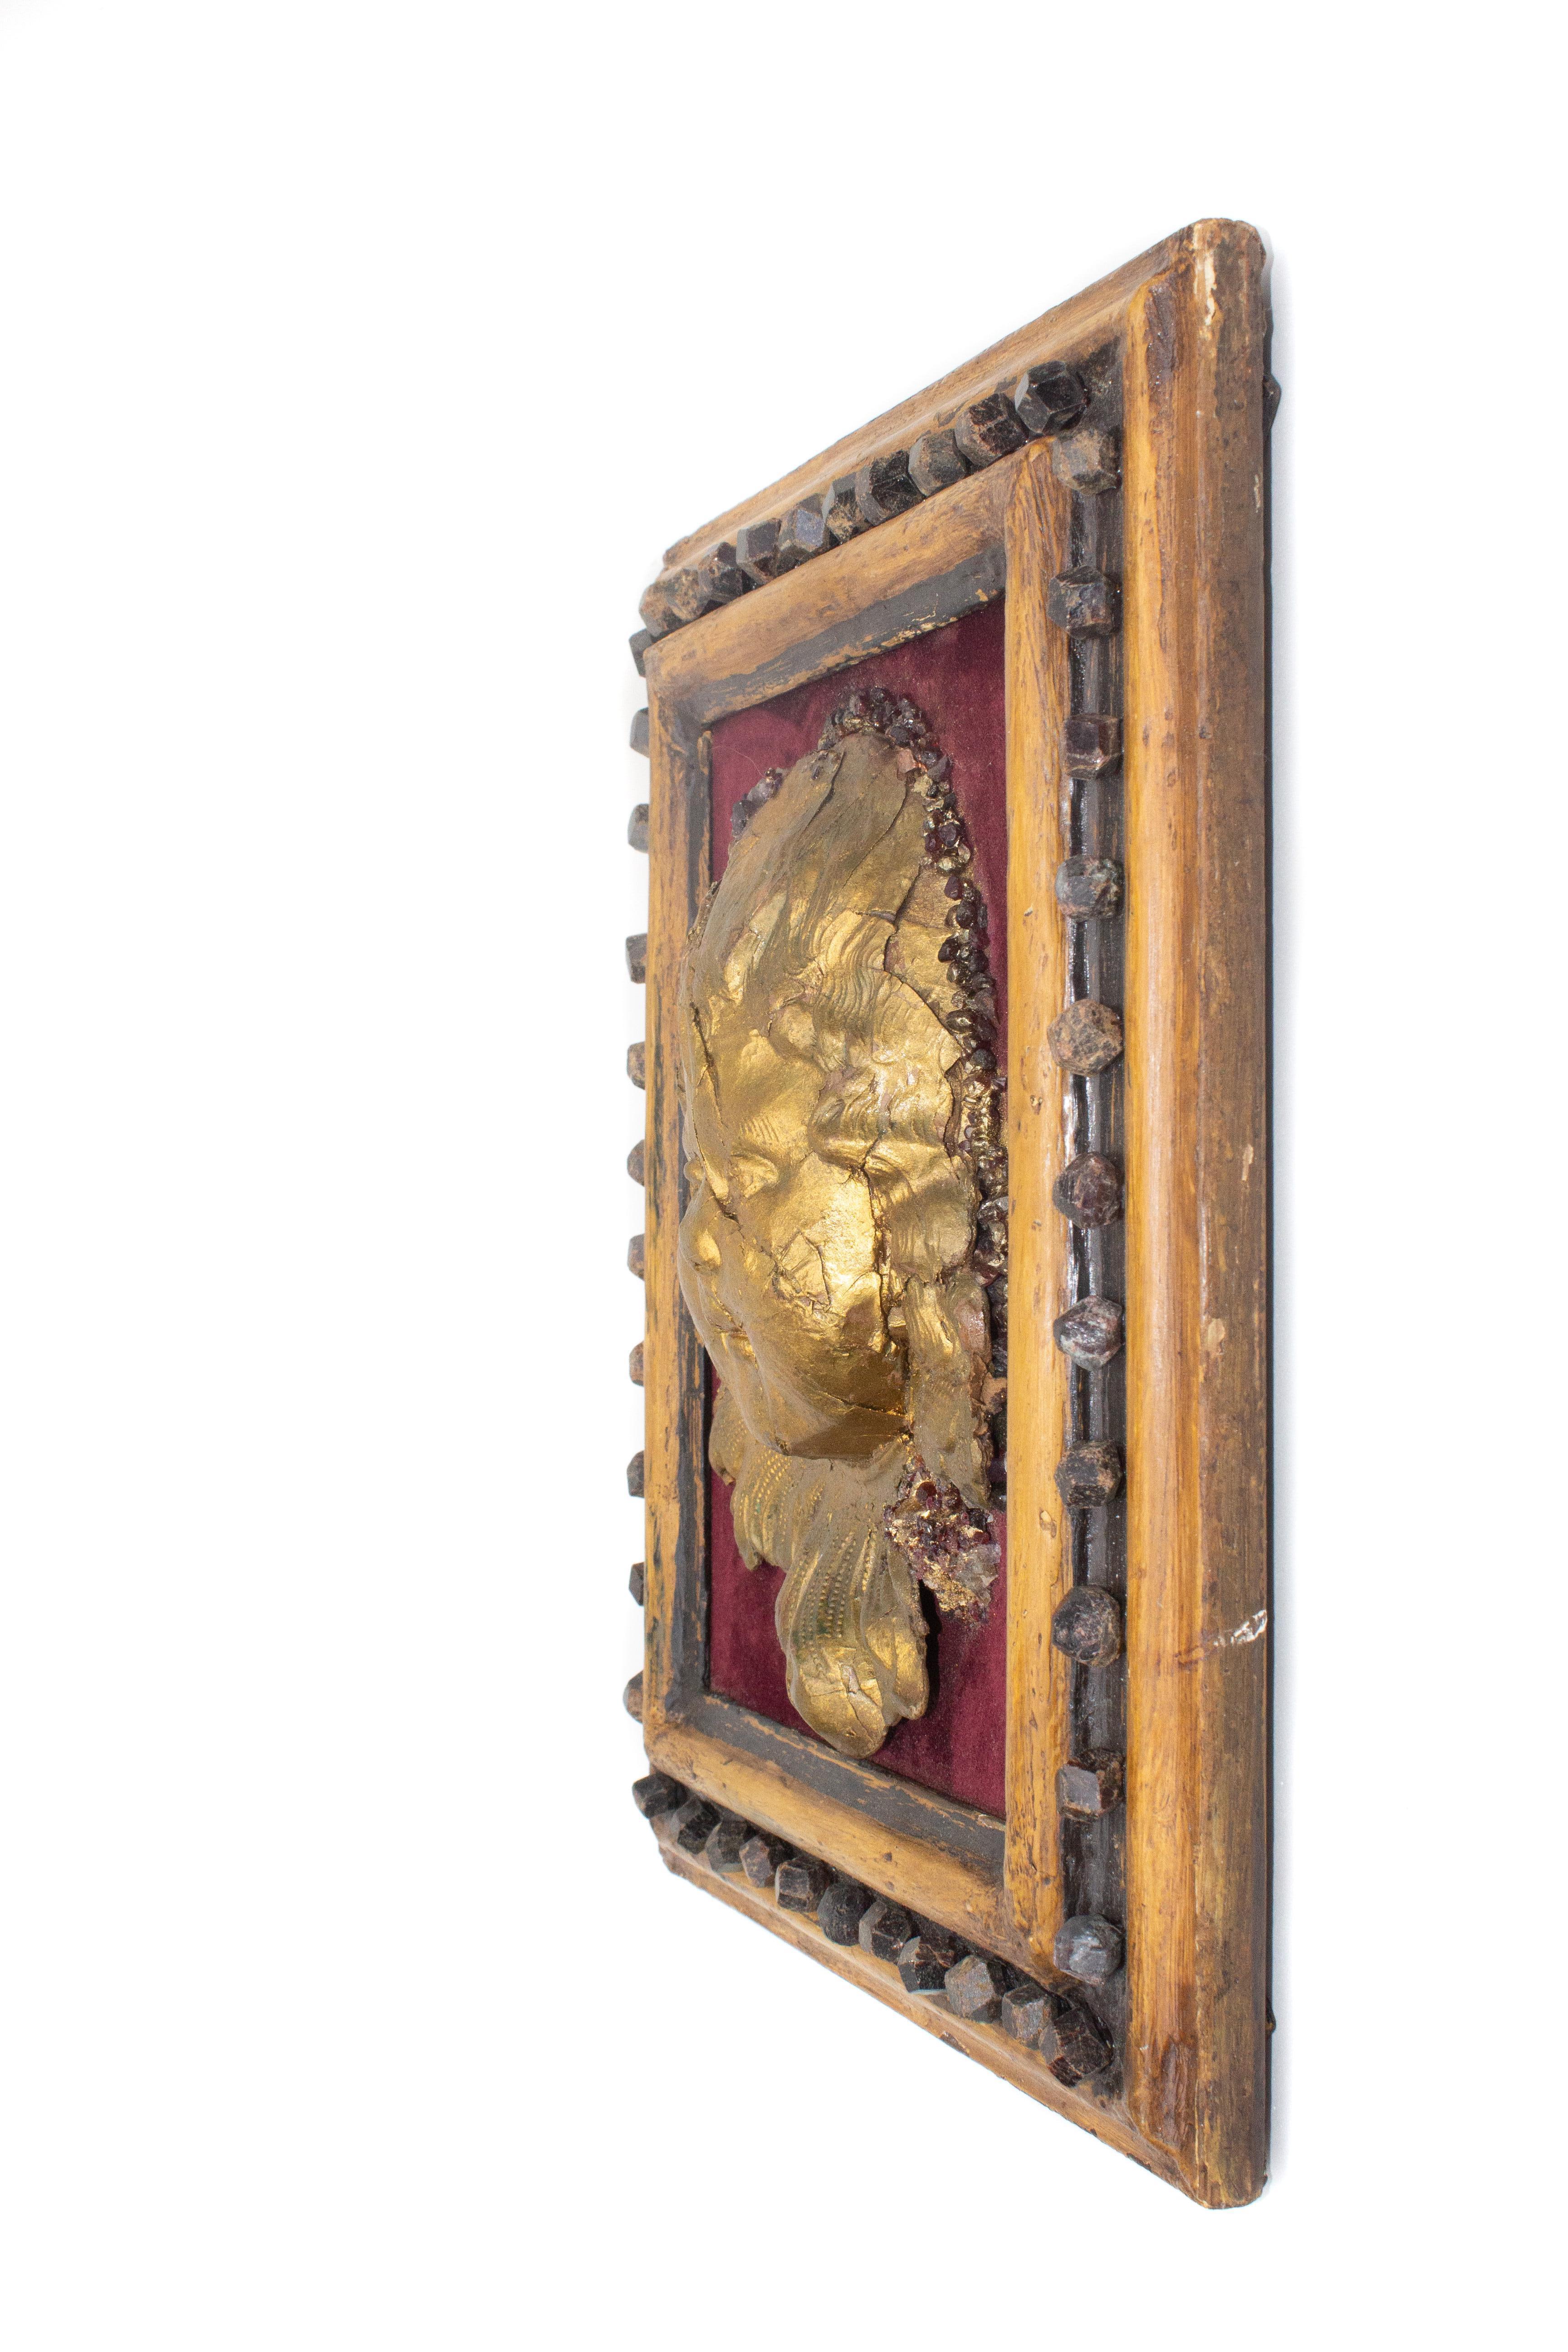 Framed 18th Century Italian Gold Leaf Angel Head Wall Relief Sculpture In Good Condition For Sale In Dublin, Dalkey